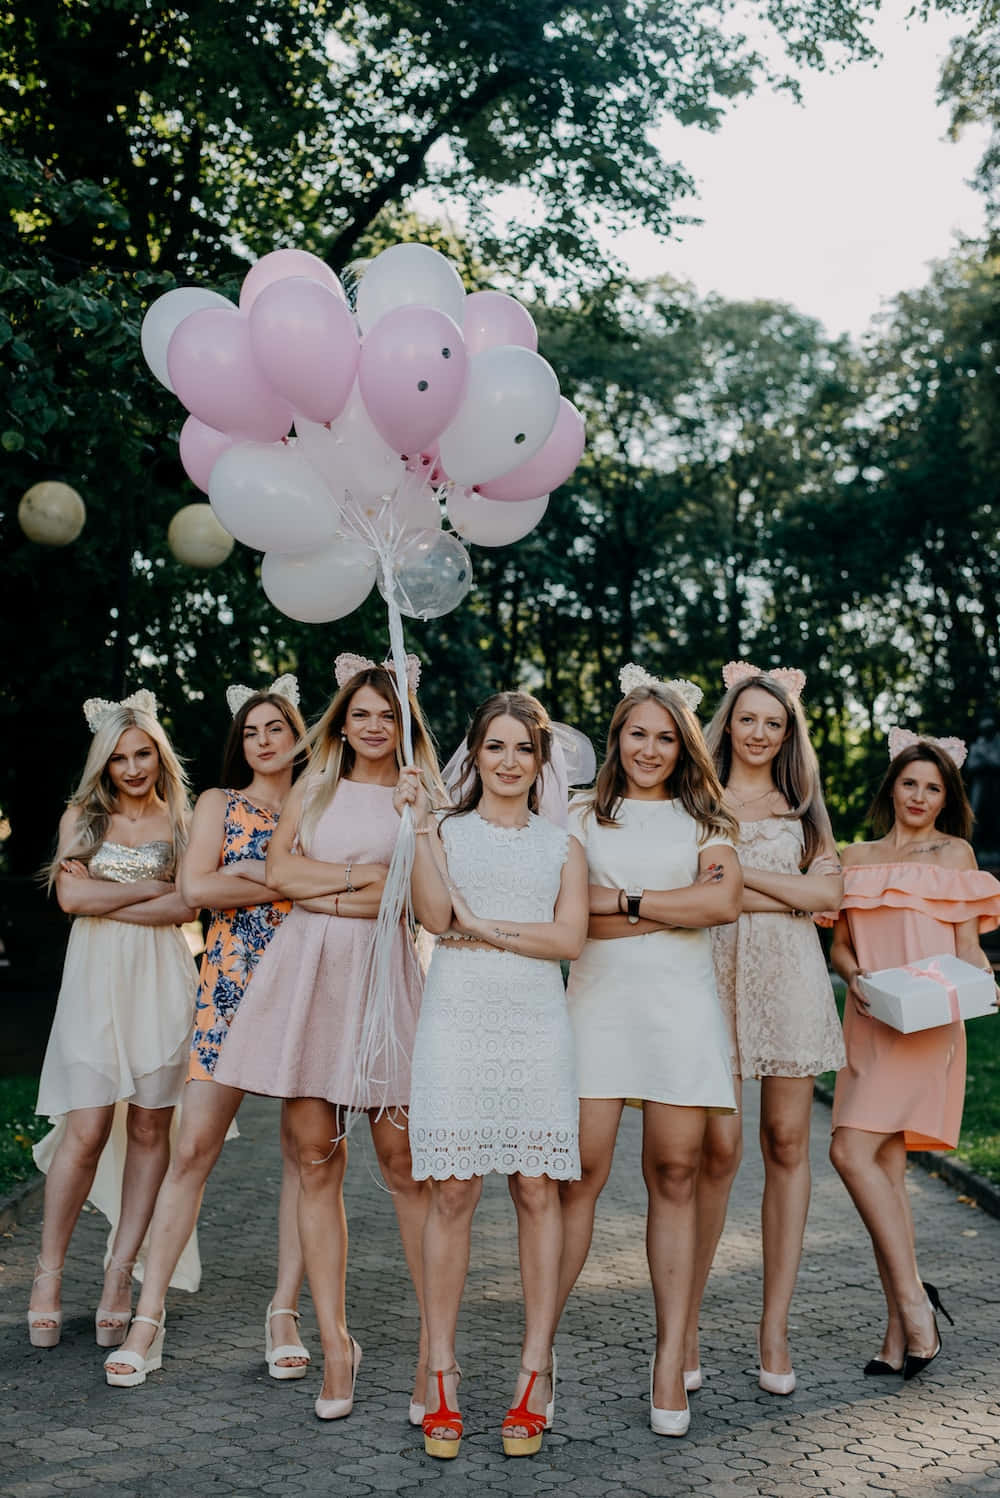 A Group Of Women In White Dresses Holding Balloons